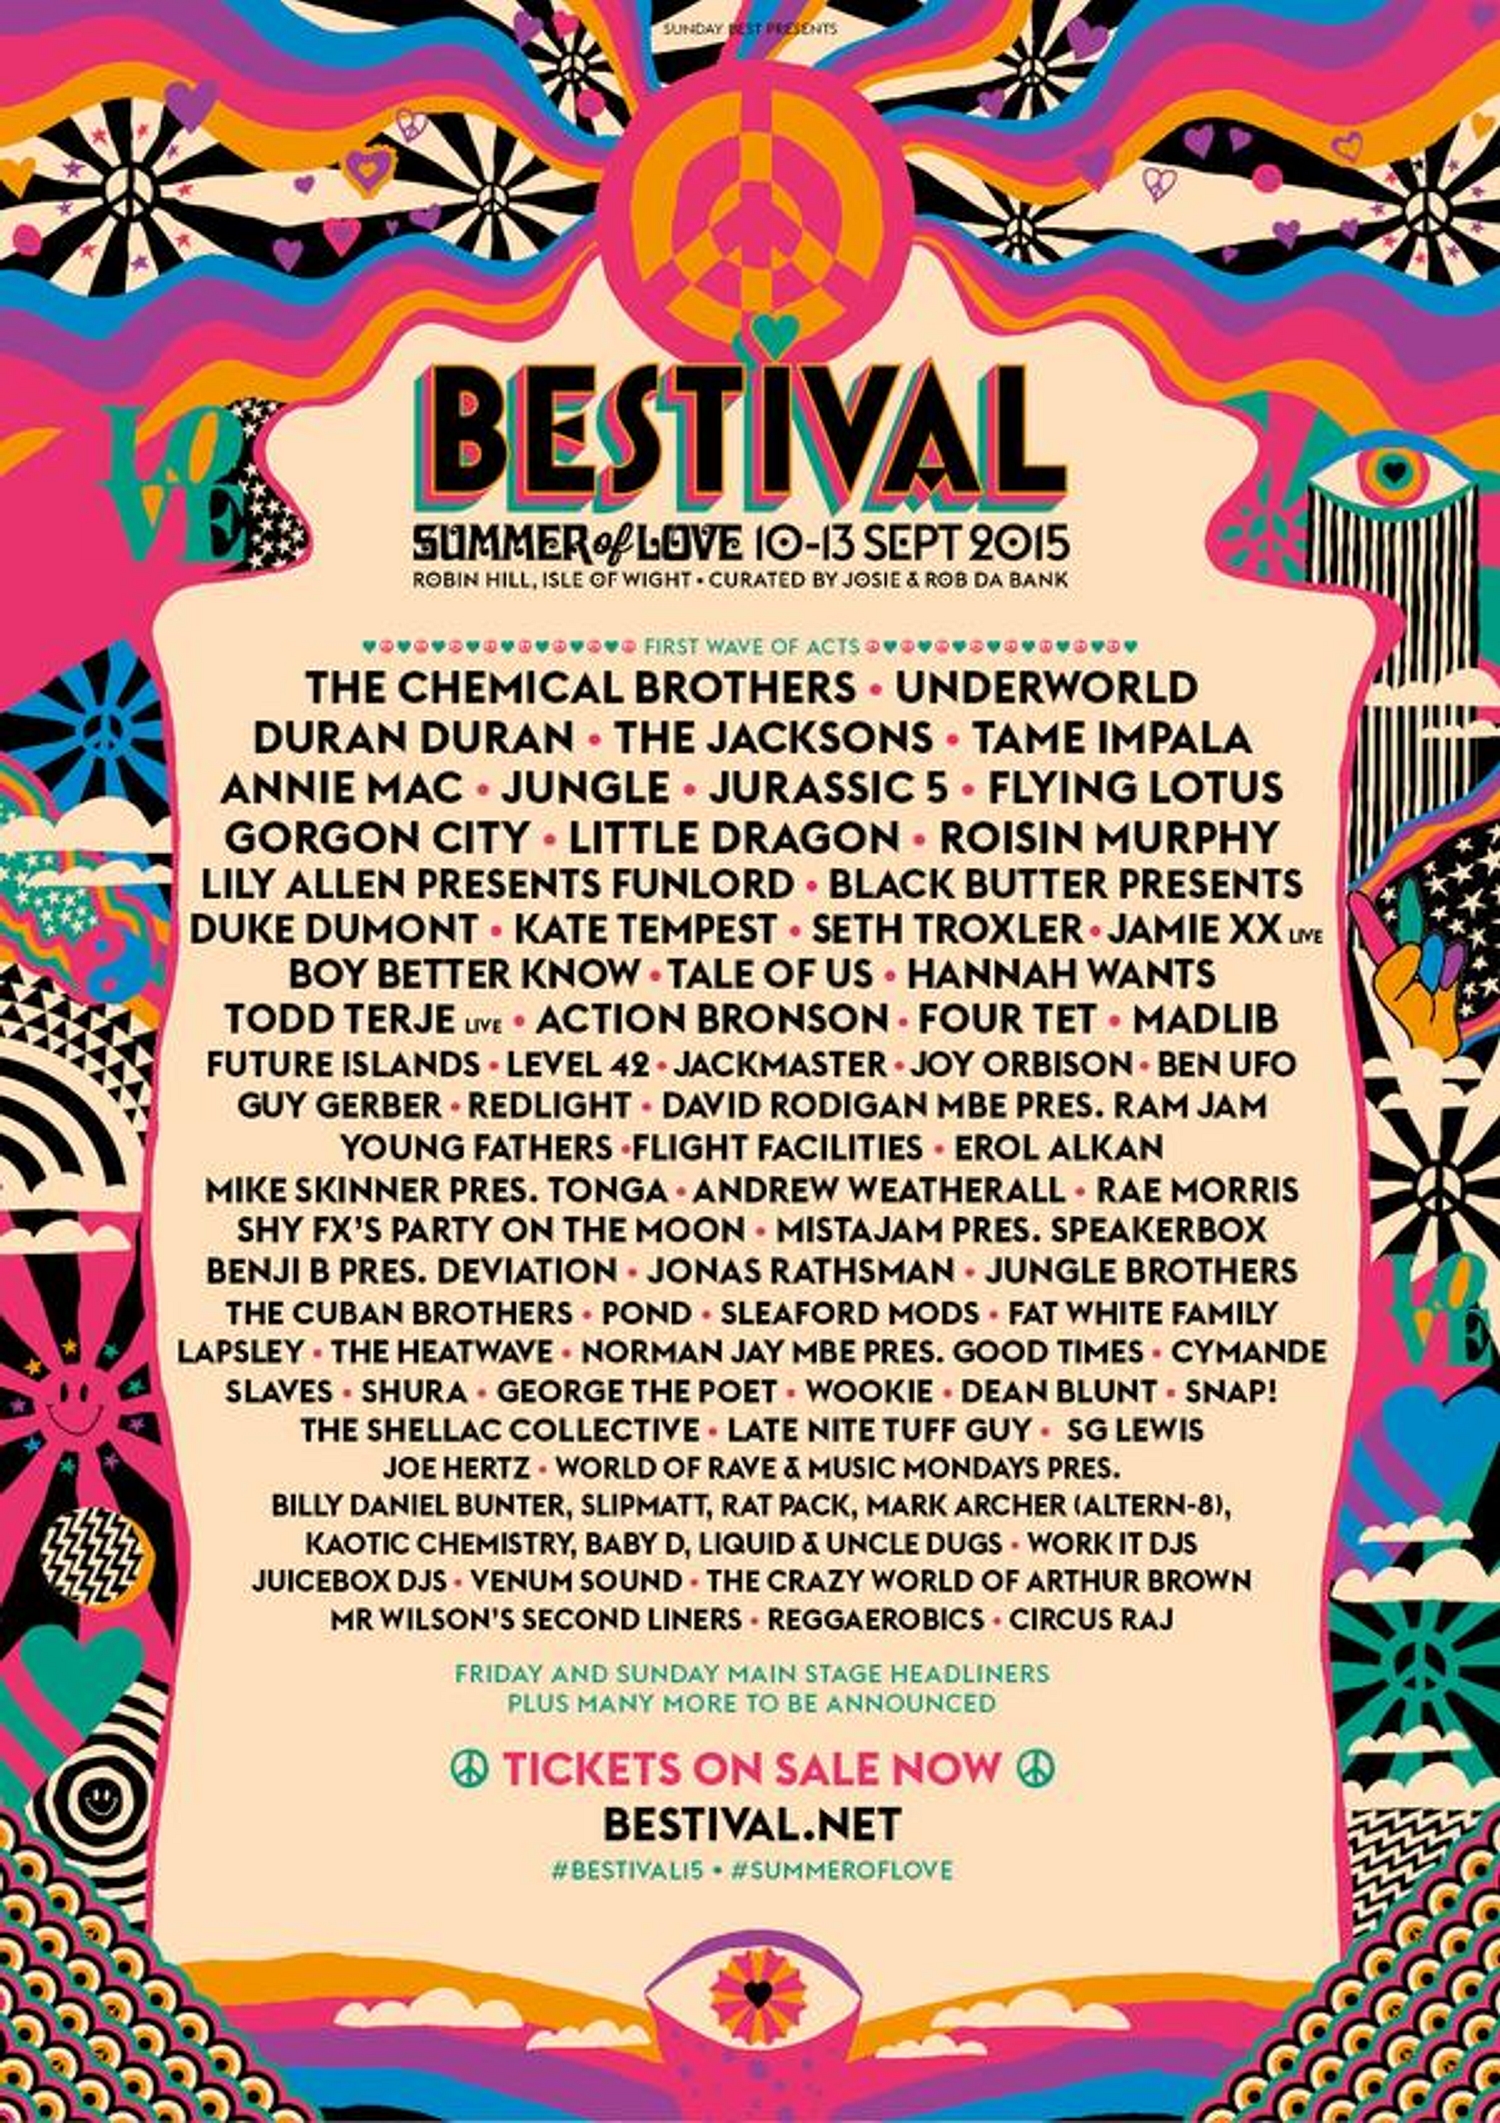 The Chemical Brothers & Tame Impala for Bestival 2015